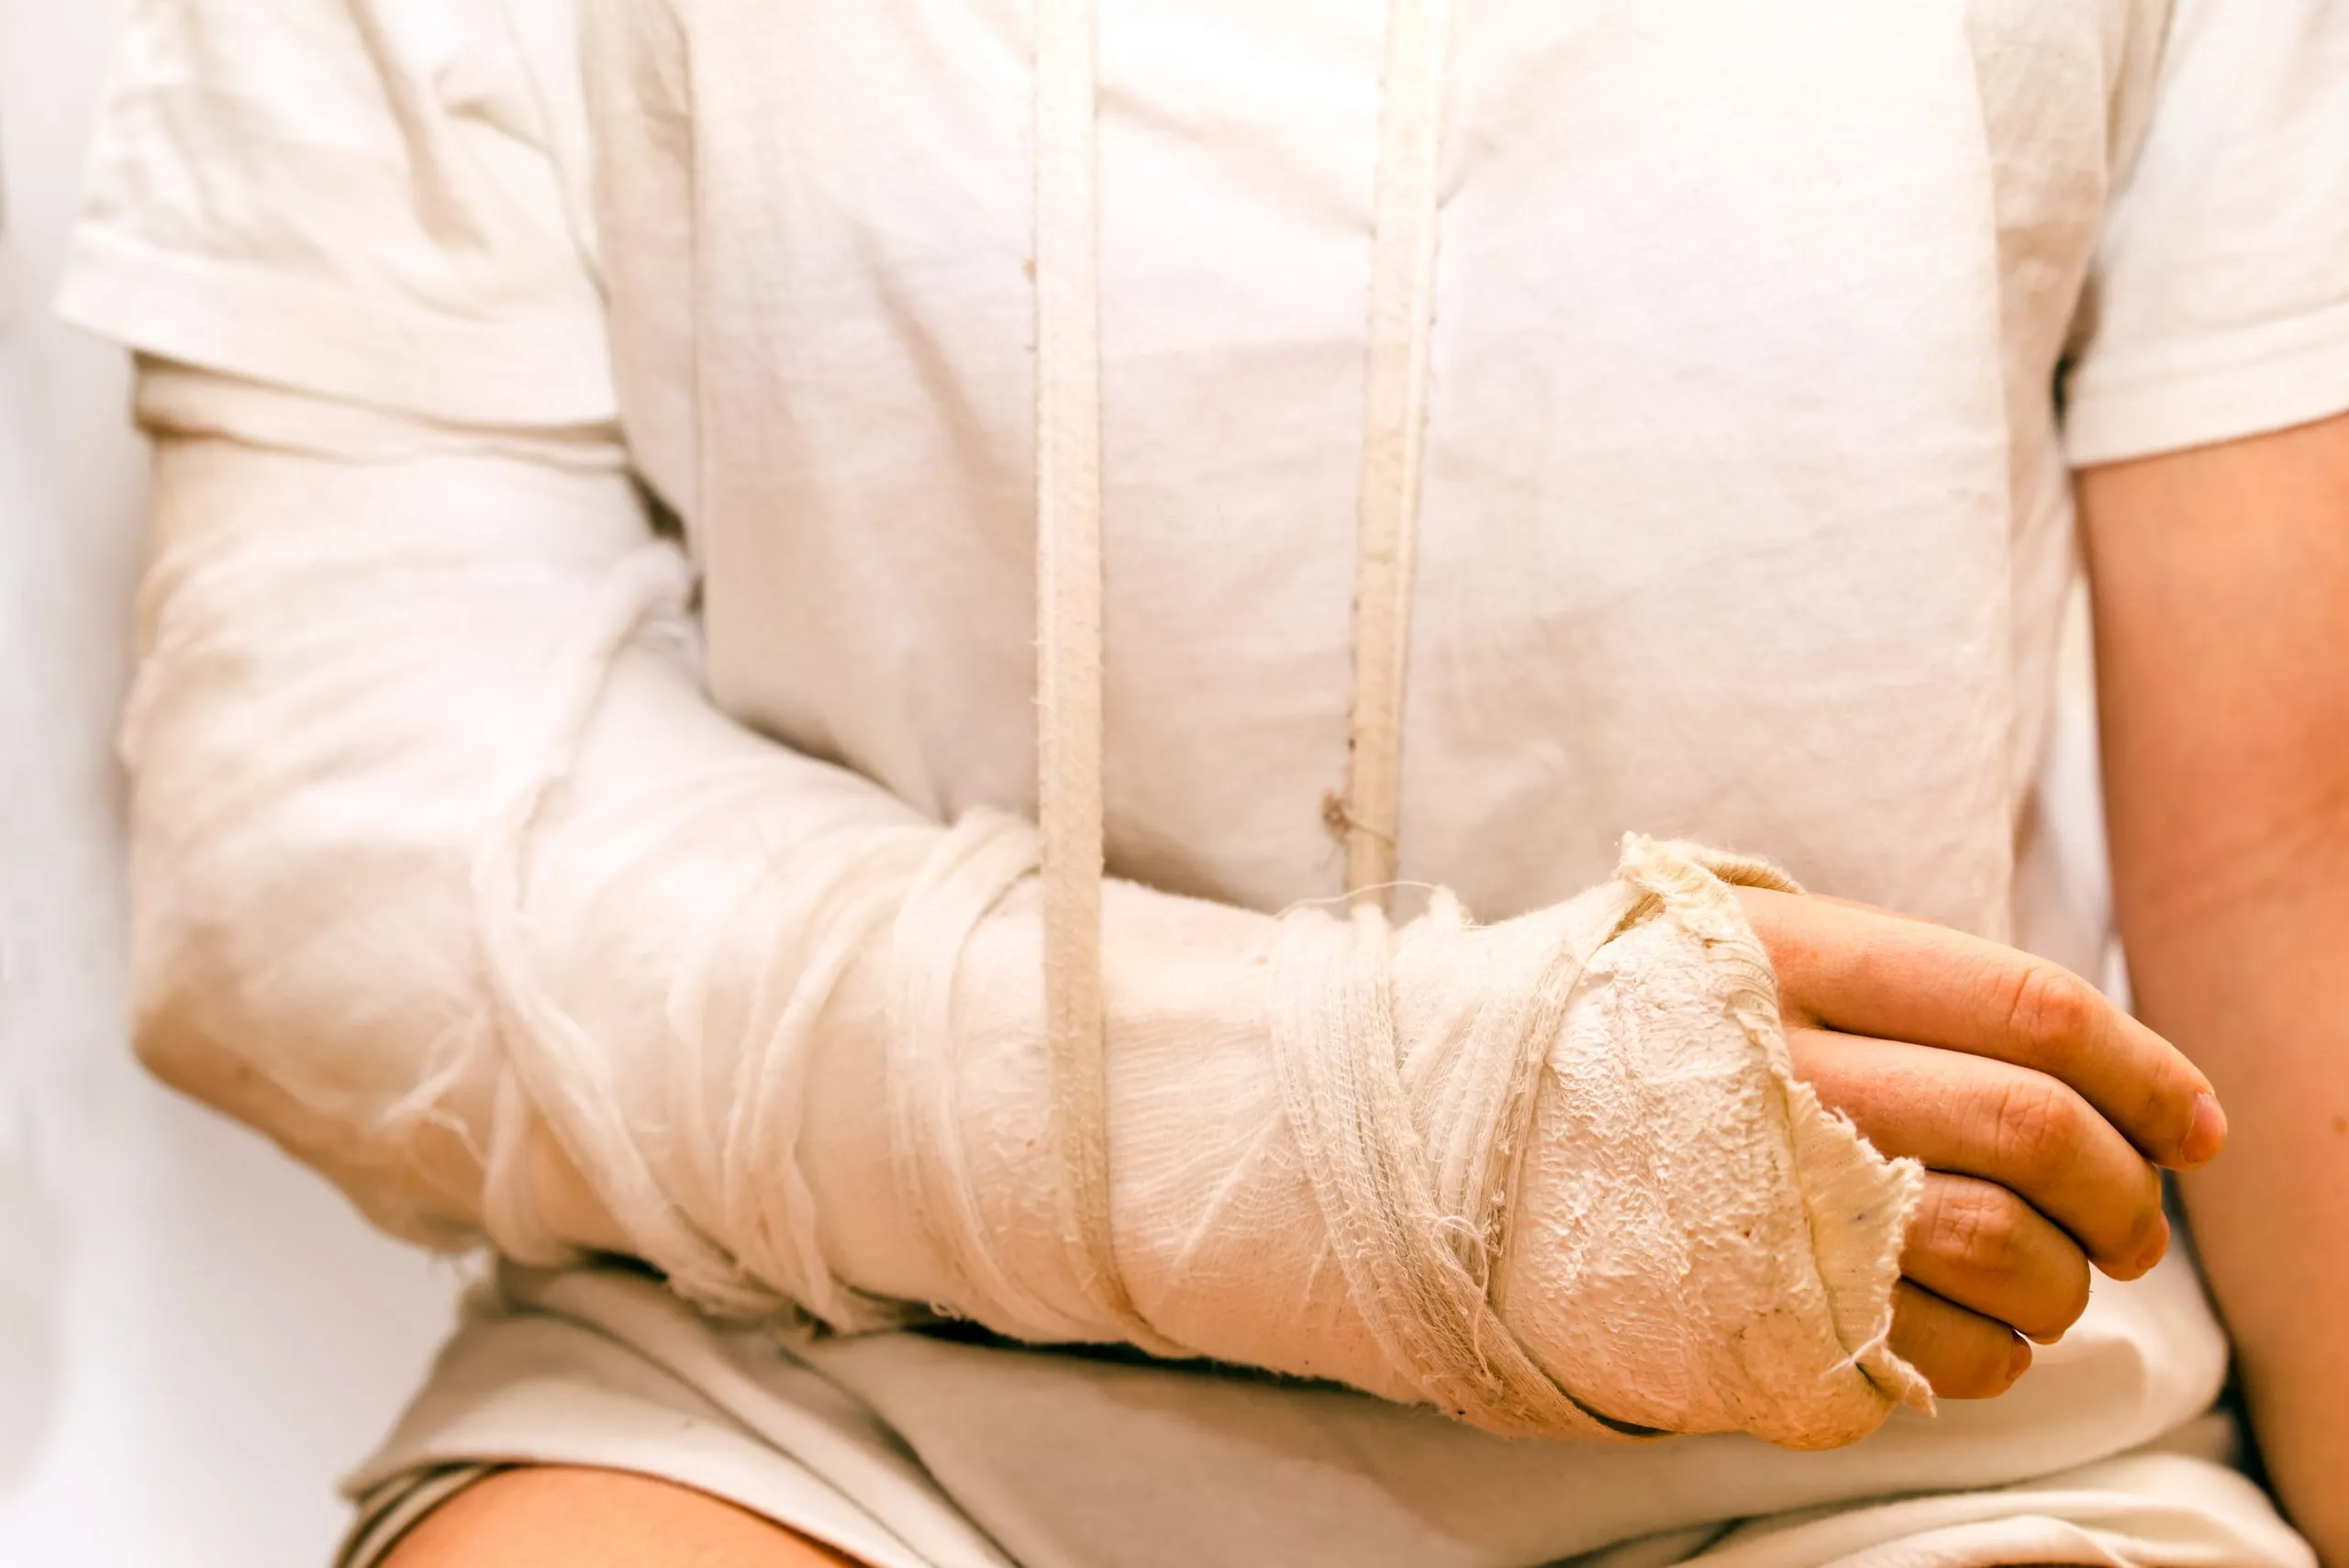 Broken arm in cast. If you’ve sustained an injury due to the negligent acts of others, our Kansas City personal injury lawyers are ready to fight for you.